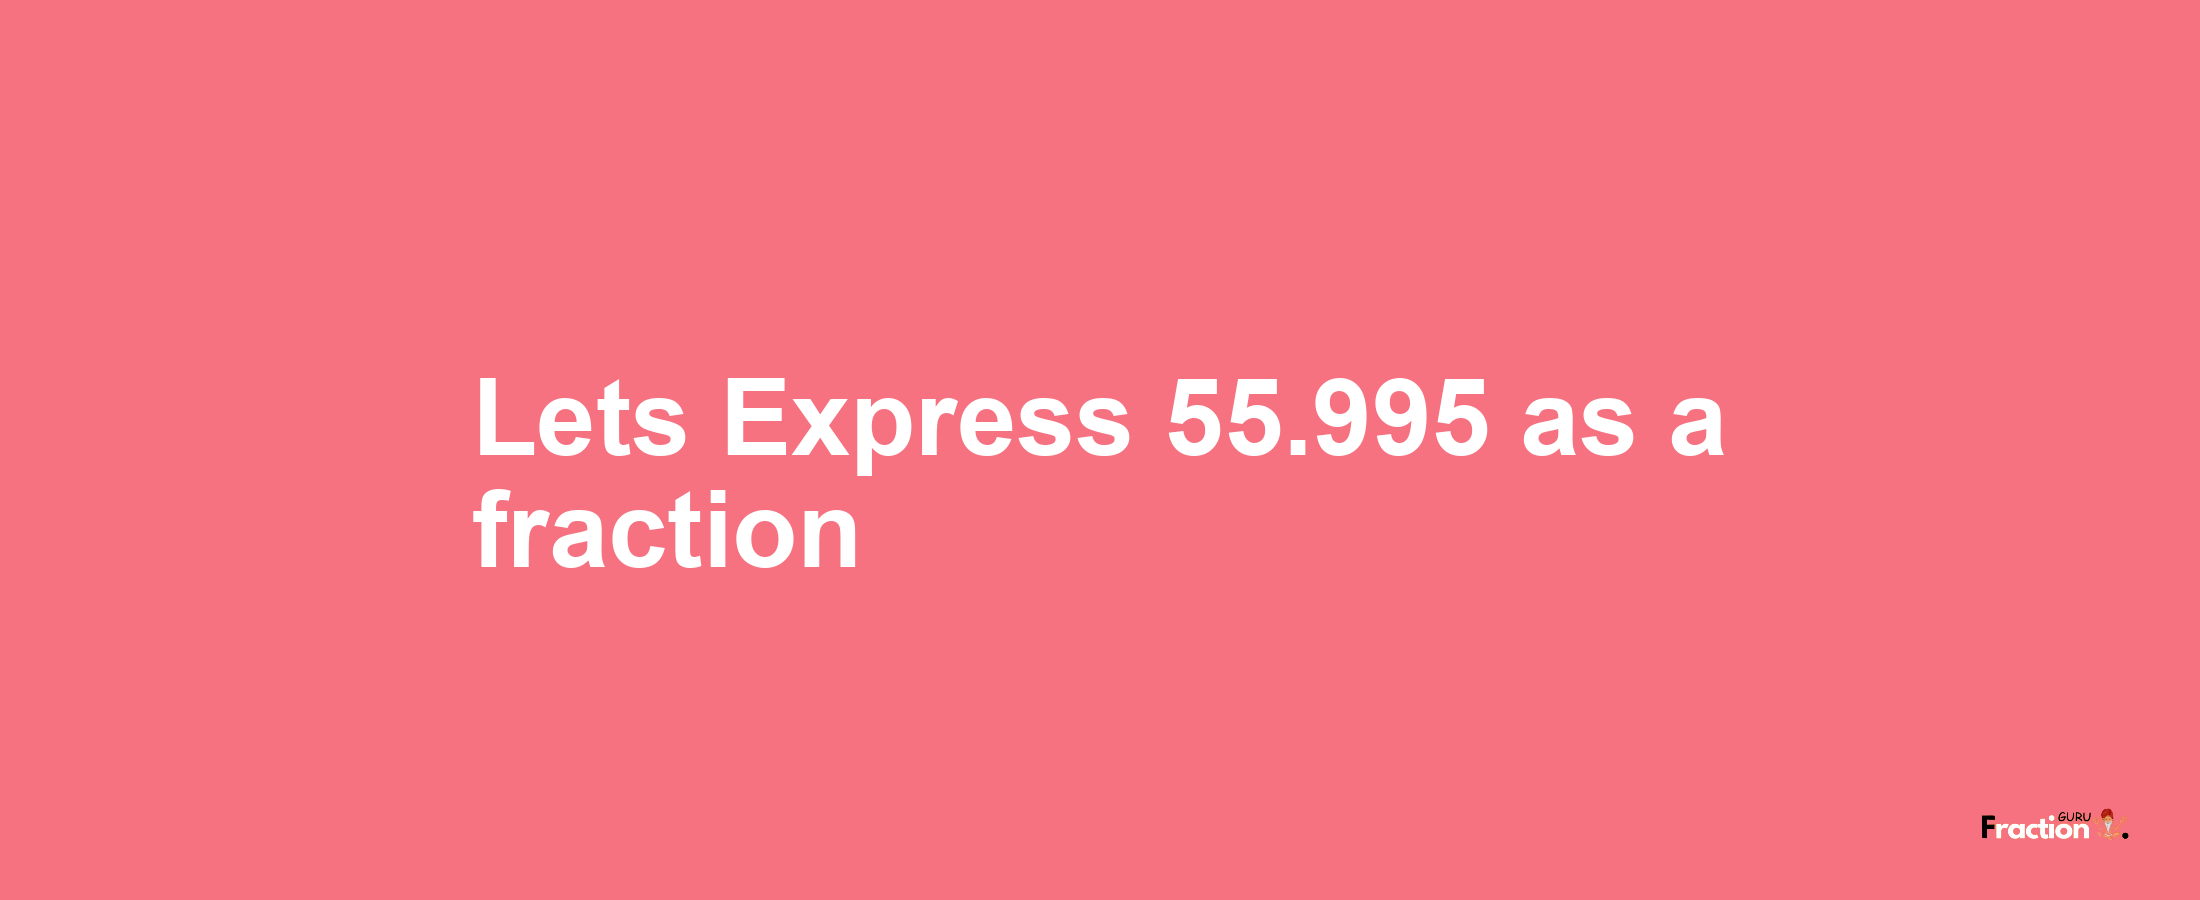 Lets Express 55.995 as afraction